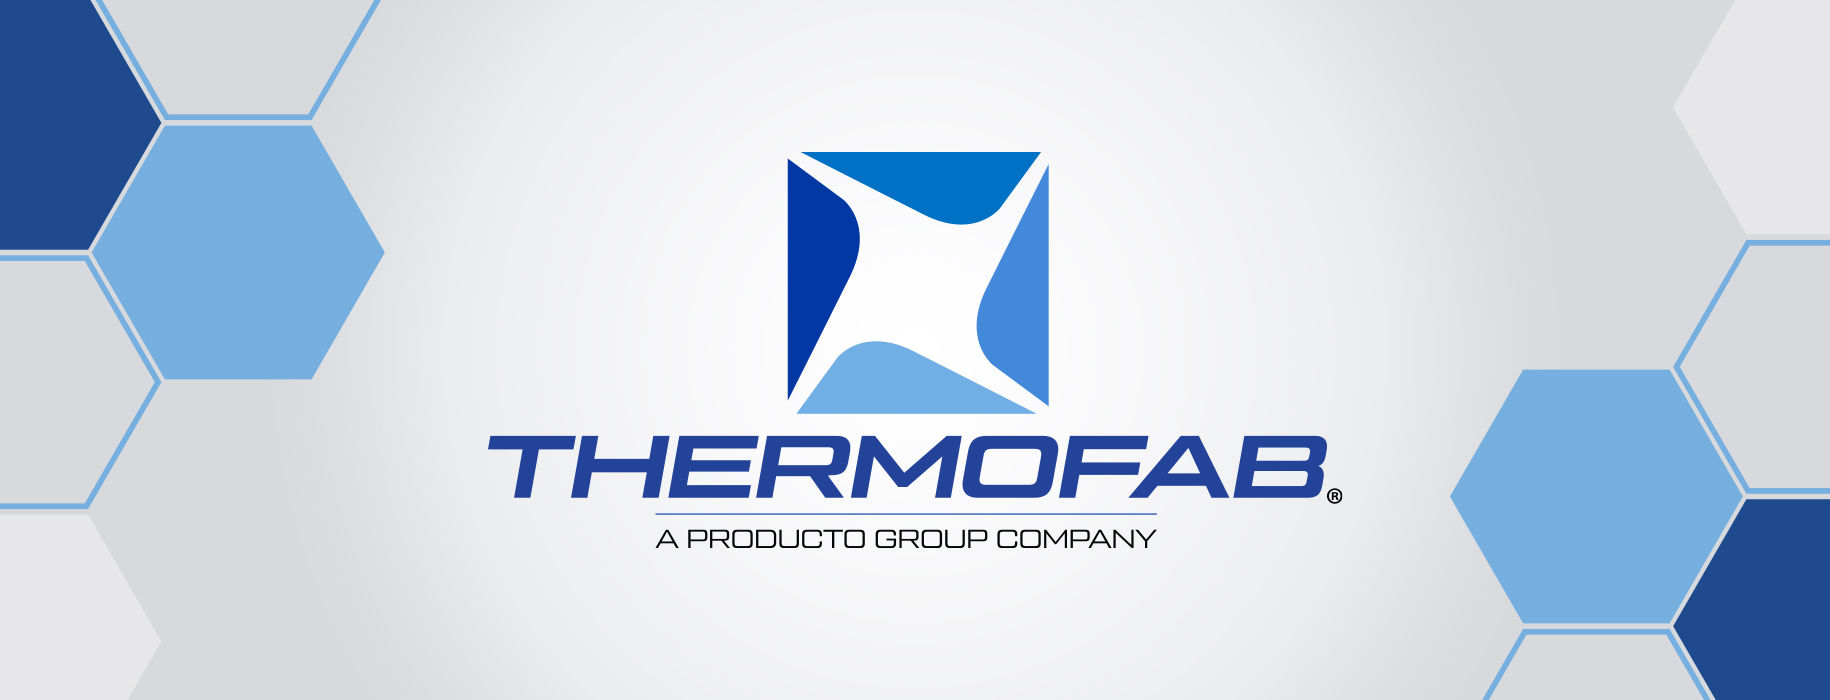 ThermoFab was acquired